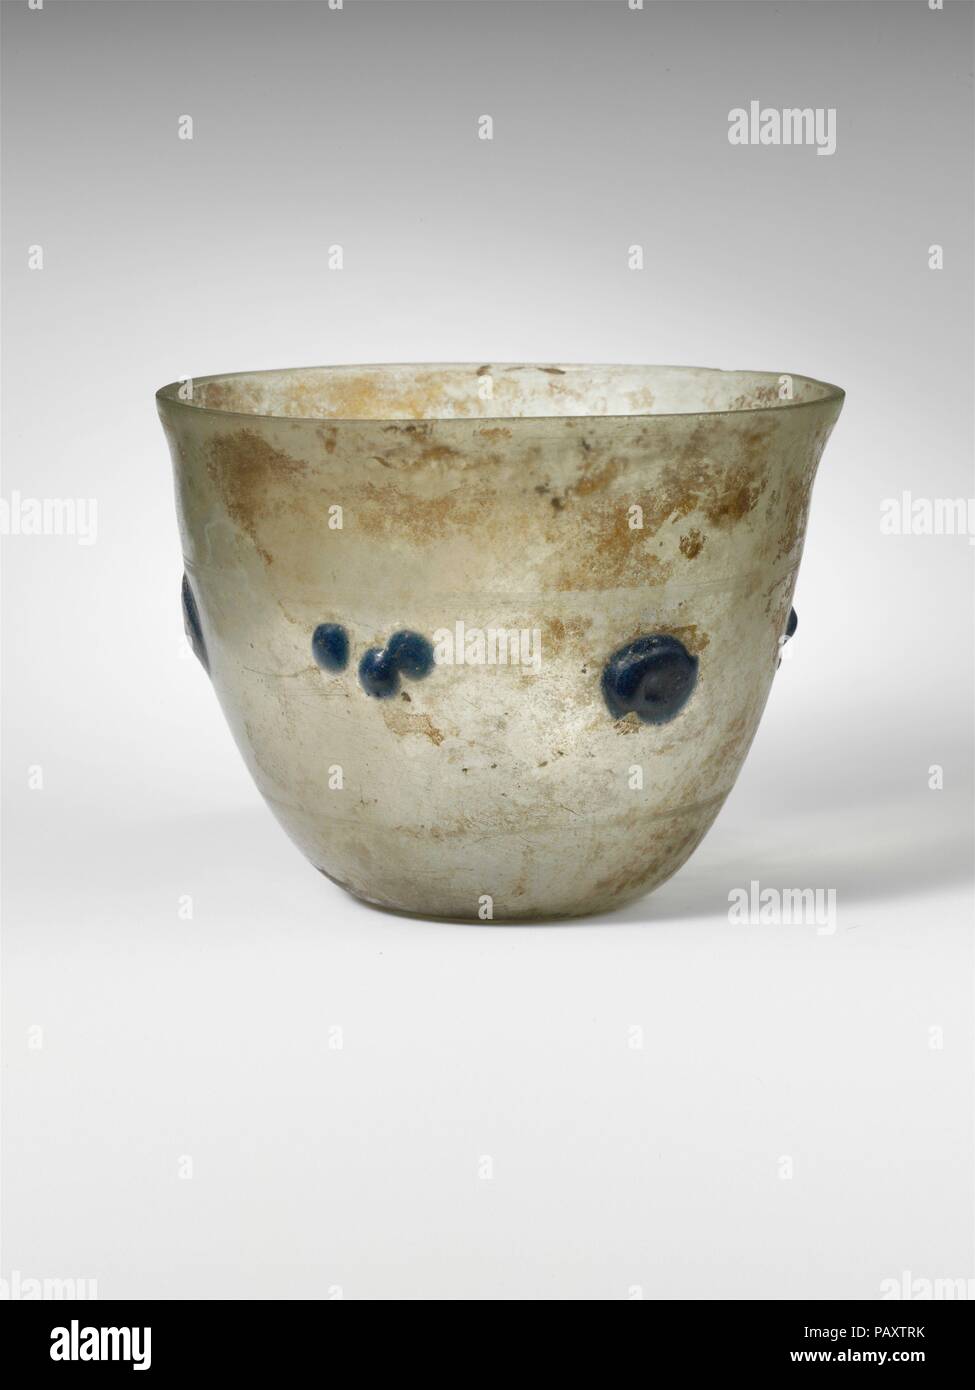 https://c8.alamy.com/comp/PAXTRK/glass-beaker-or-lamp-culture-roman-dimensions-h-3-58-in-92-cm-diam-10-34-in-273-cm-date-4th-century-ad-colorless-with-pale-green-tinge-translucent-cobalt-blue-blobs-thick-uneven-rim-cracked-off-and-ground-slightly-outsplayed-convex-side-to-body-tapering-downwards-concave-bottom-midway-down-side-band-of-applied-blobs-comprising-three-sets-of-two-alternating-patterns-one-being-a-single-large-and-thick-blob-the-other-three-smaller-blobs-arranged-in-a-triangular-pattern-above-and-below-blobs-a-single-broad-horizontal-wheel-abraded-band-intact-except-for-PAXTRK.jpg